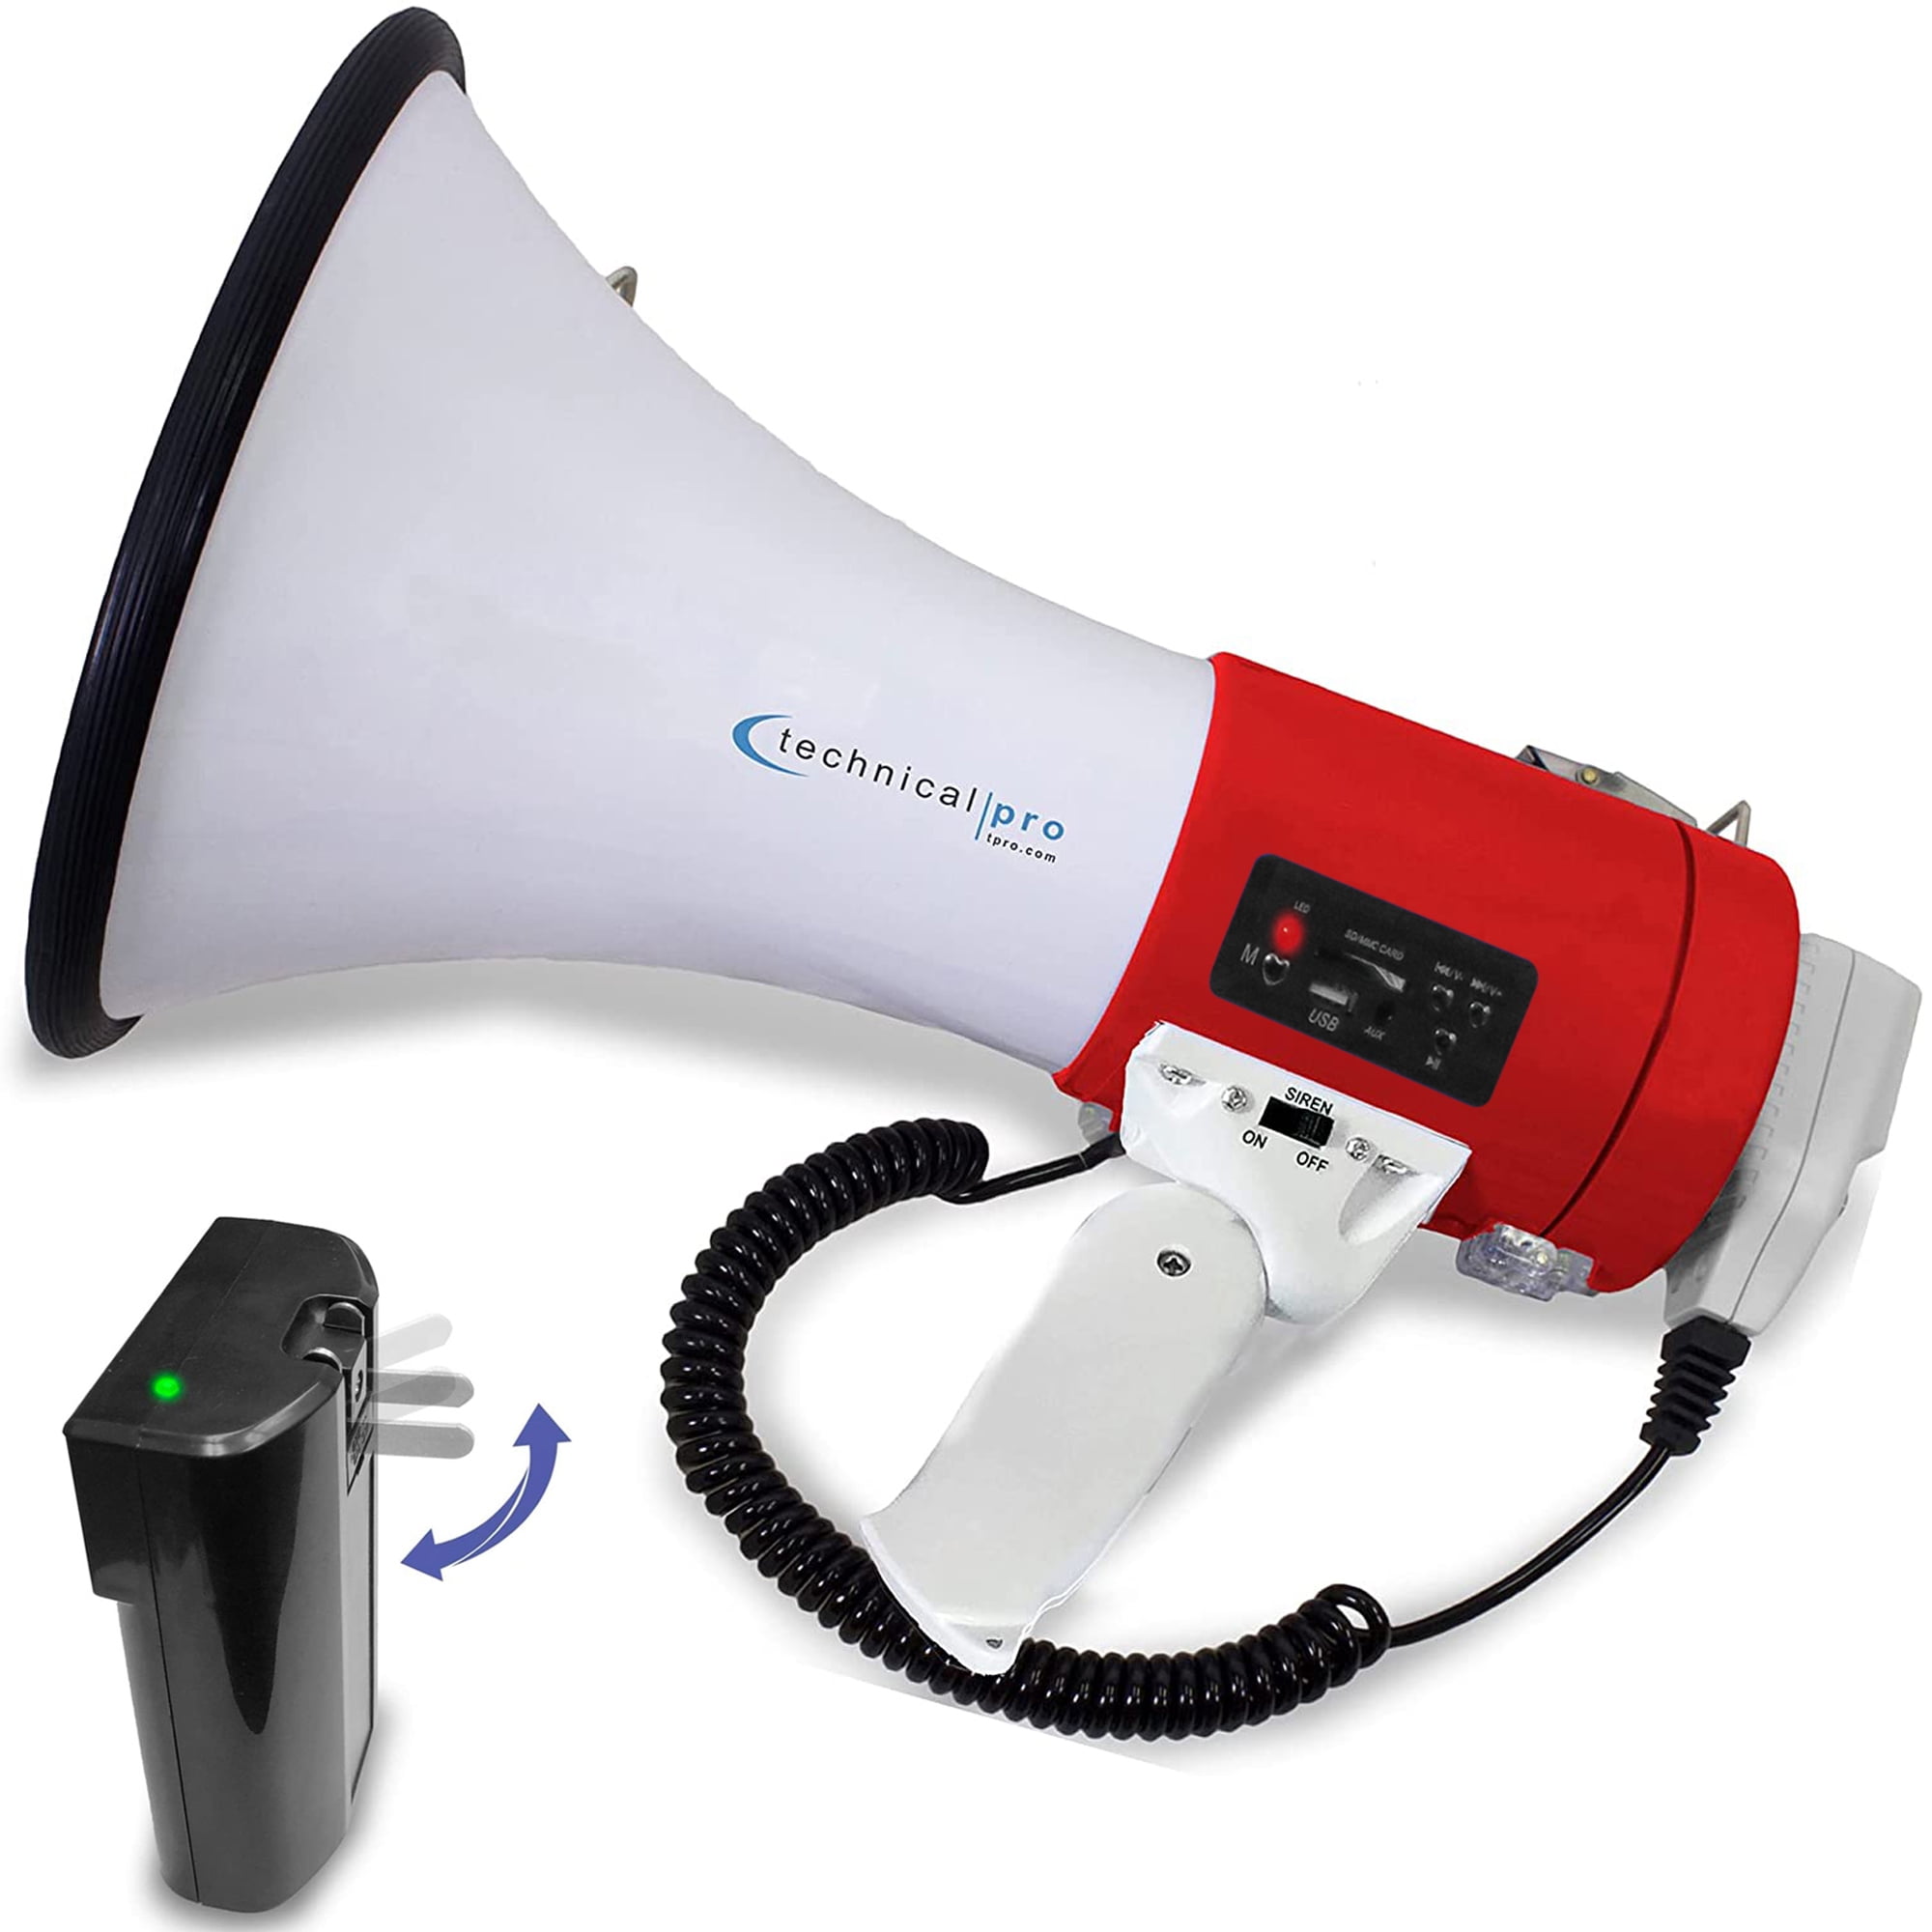 a Built-in AC Wall Charger Good for Trainers Technical Pro Portable 50-Watt Megaphone Bullhorn Speaker w/Detachable Microphone w/Rechargeable Battery Cheer Leaders Soccer Coaches 